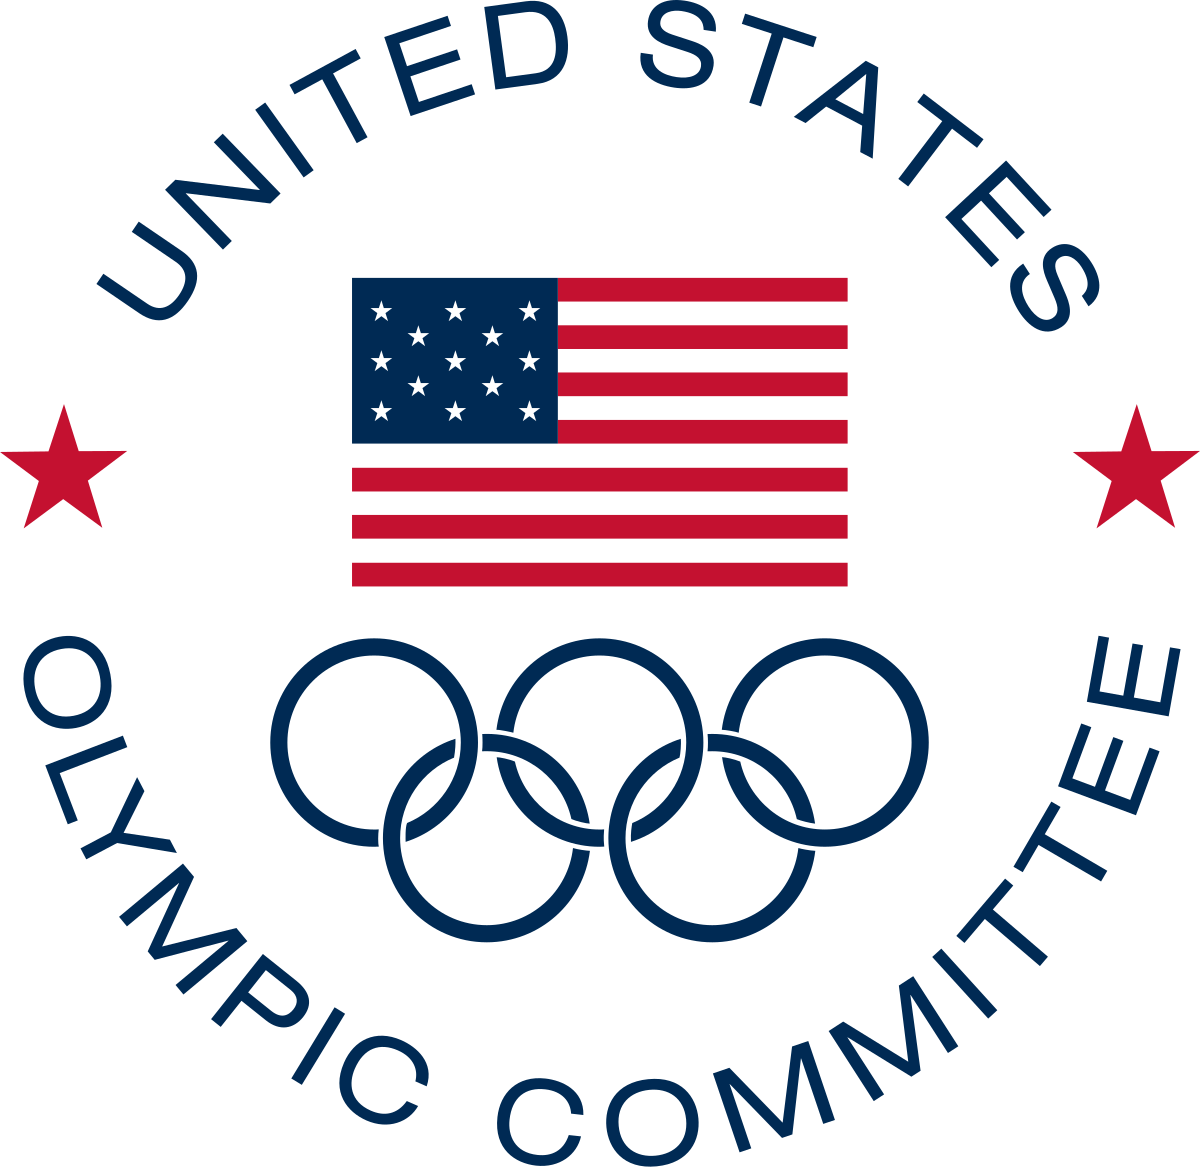 United States Olympic & Paralympic Committee - Wikipedia